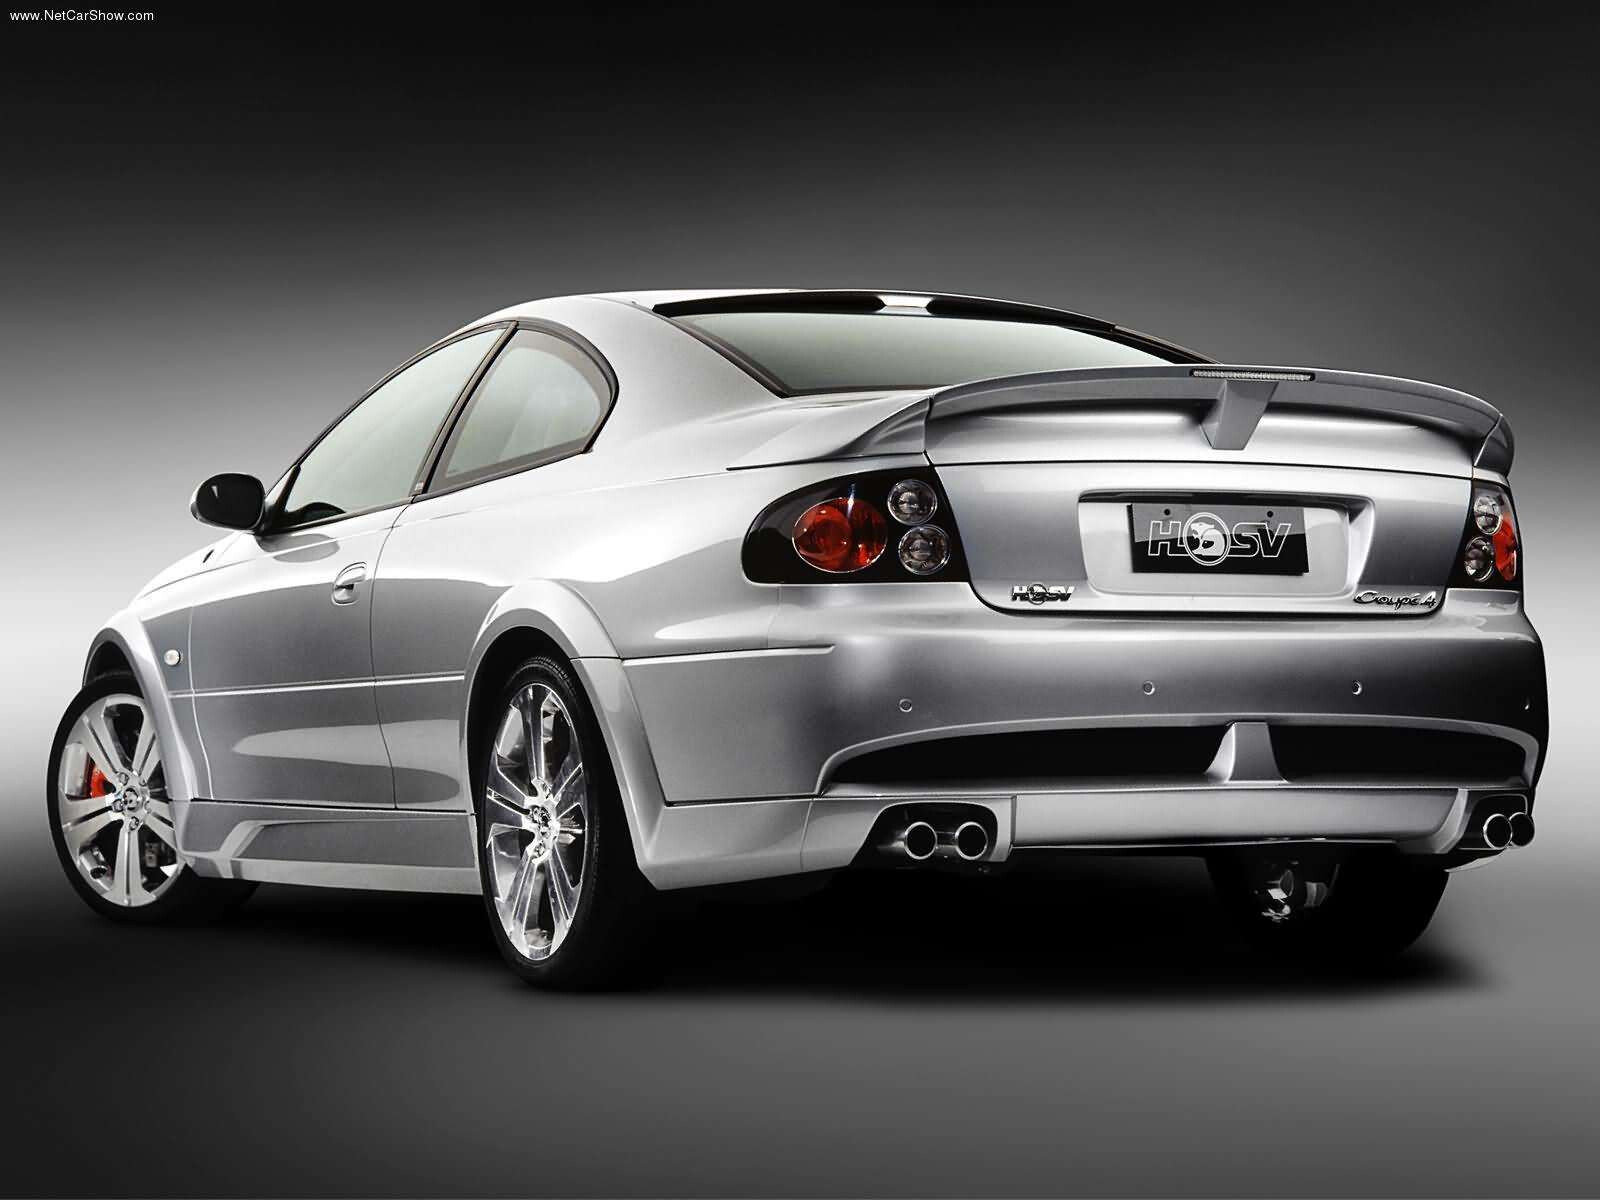 6eb2133d/hsv history holden coupe 4 2003 jpg